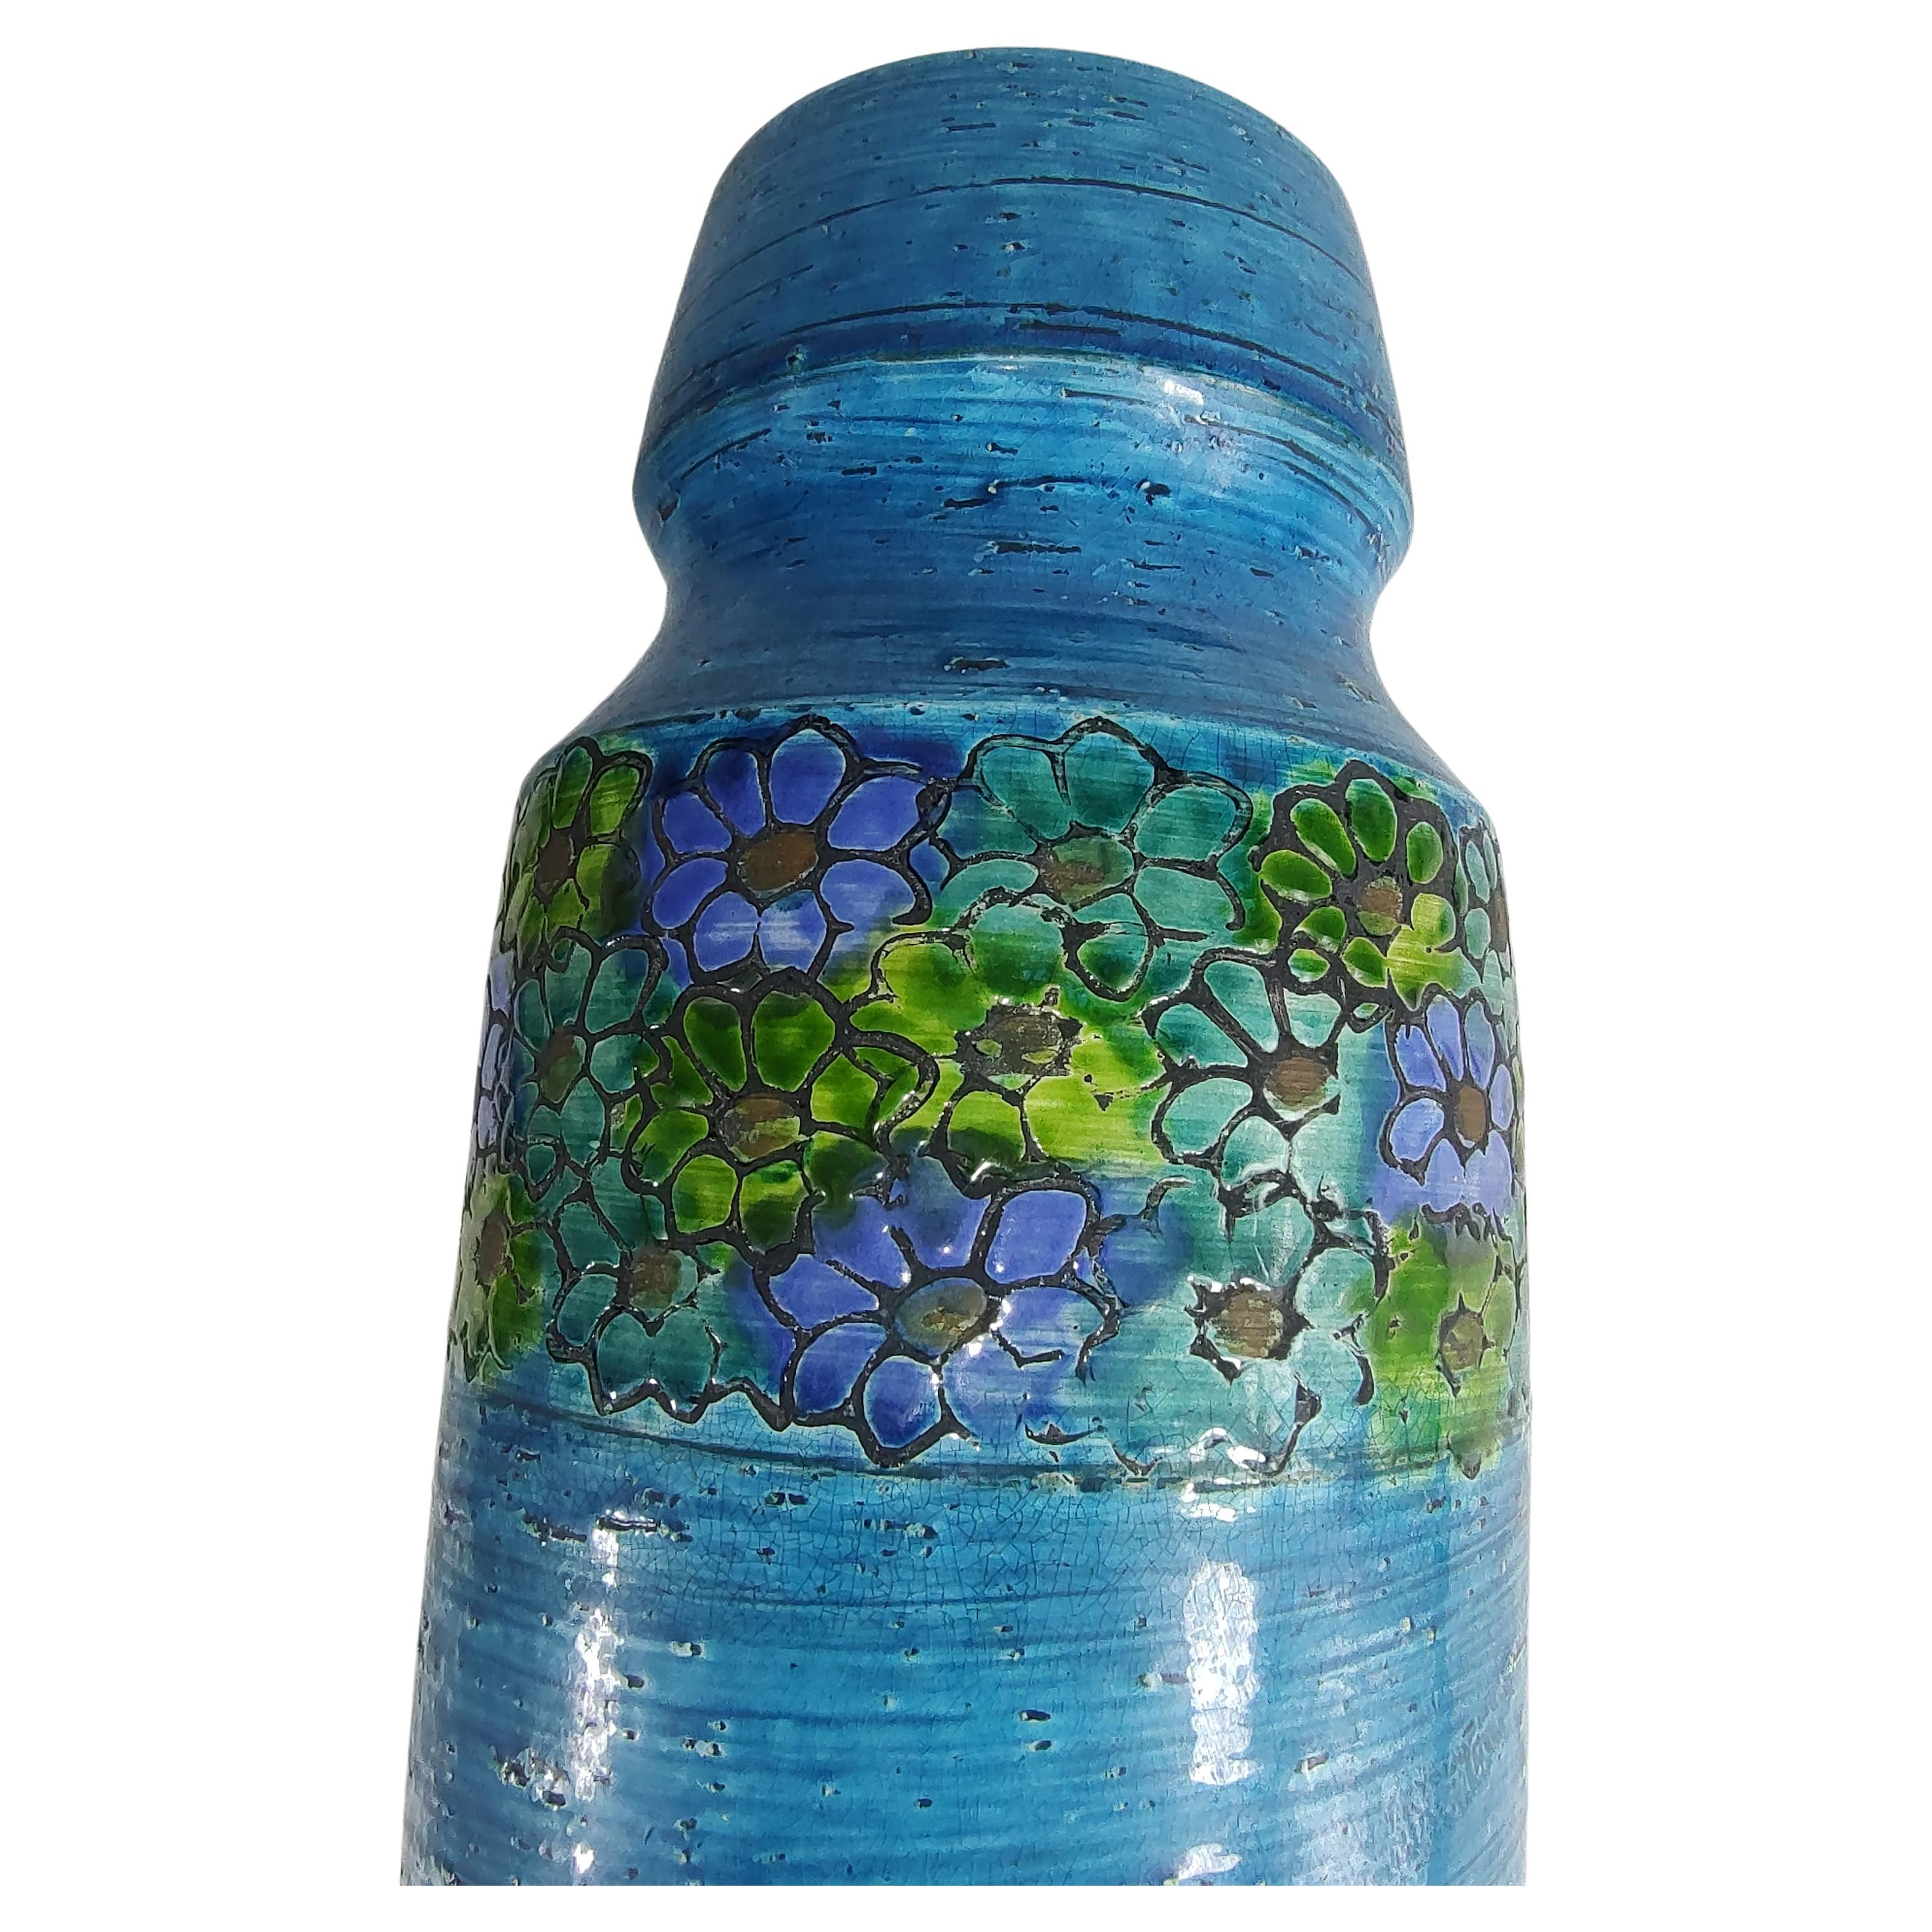 Fabulous tall vase by Aldo Londi designer for Bitossi of Italy. Amazing color, Rimini Blue with a band of flowers circling the upper portion of the vase. In excellent vintage condition with no chips or cracks. Such a serene piece of art! Signed